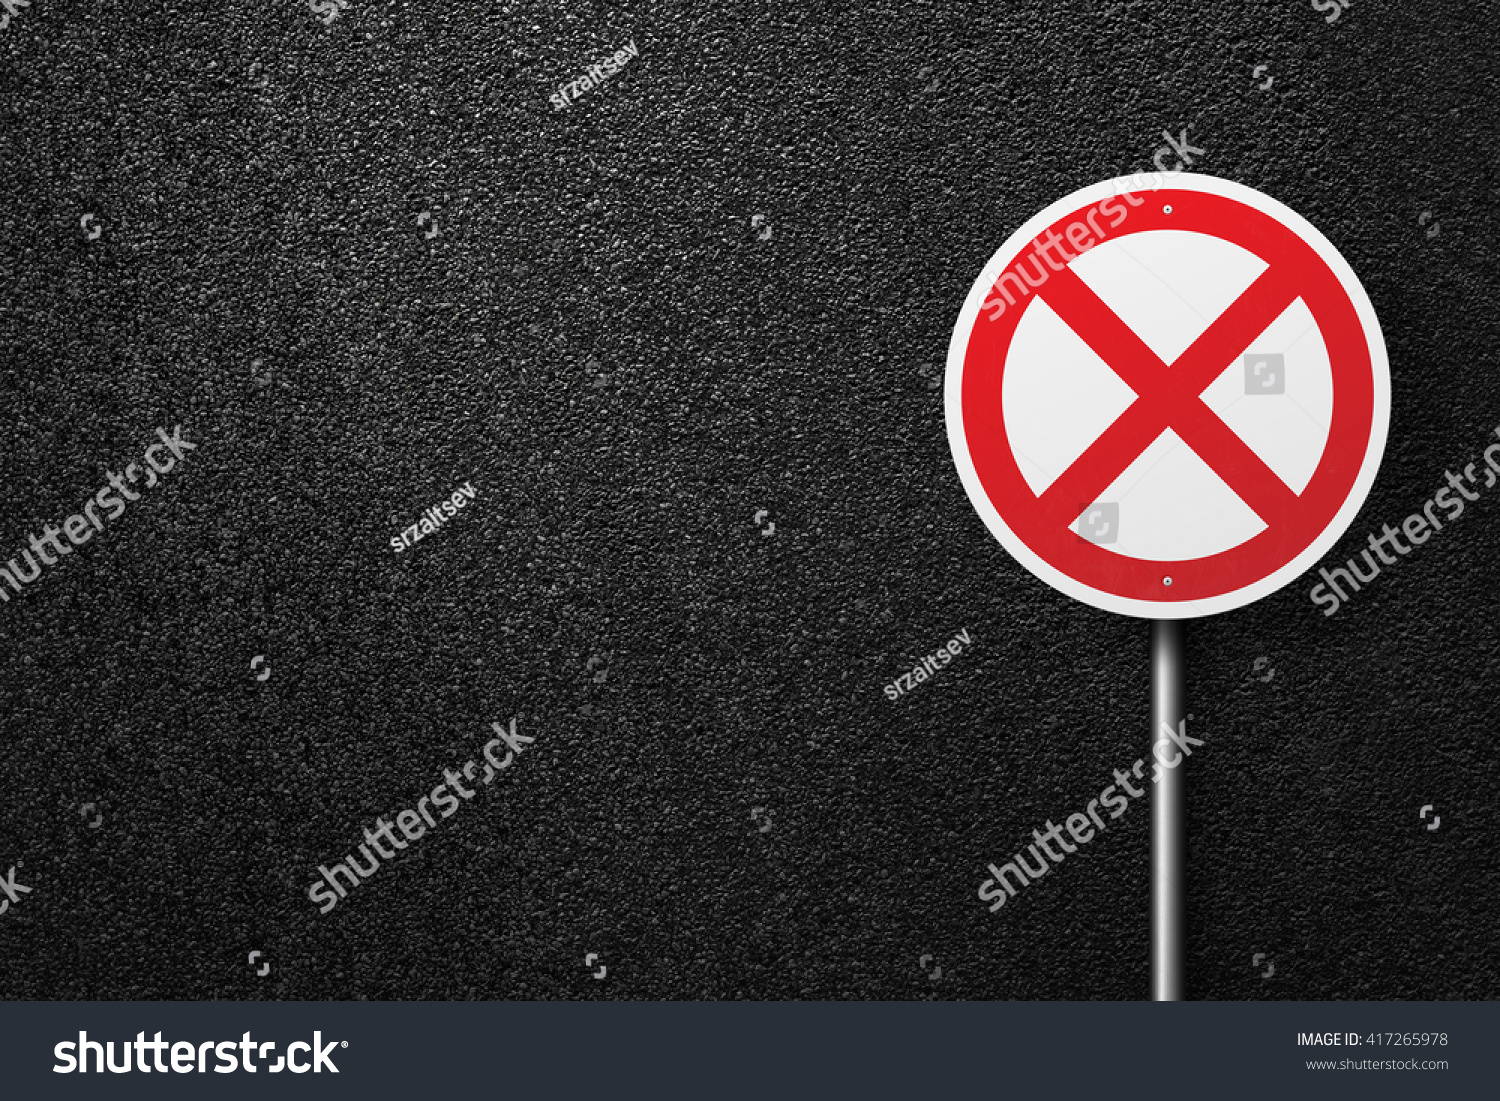 Road sign of the circular shape on a background of asphalt. The texture of the tarmac, top view. #417265978